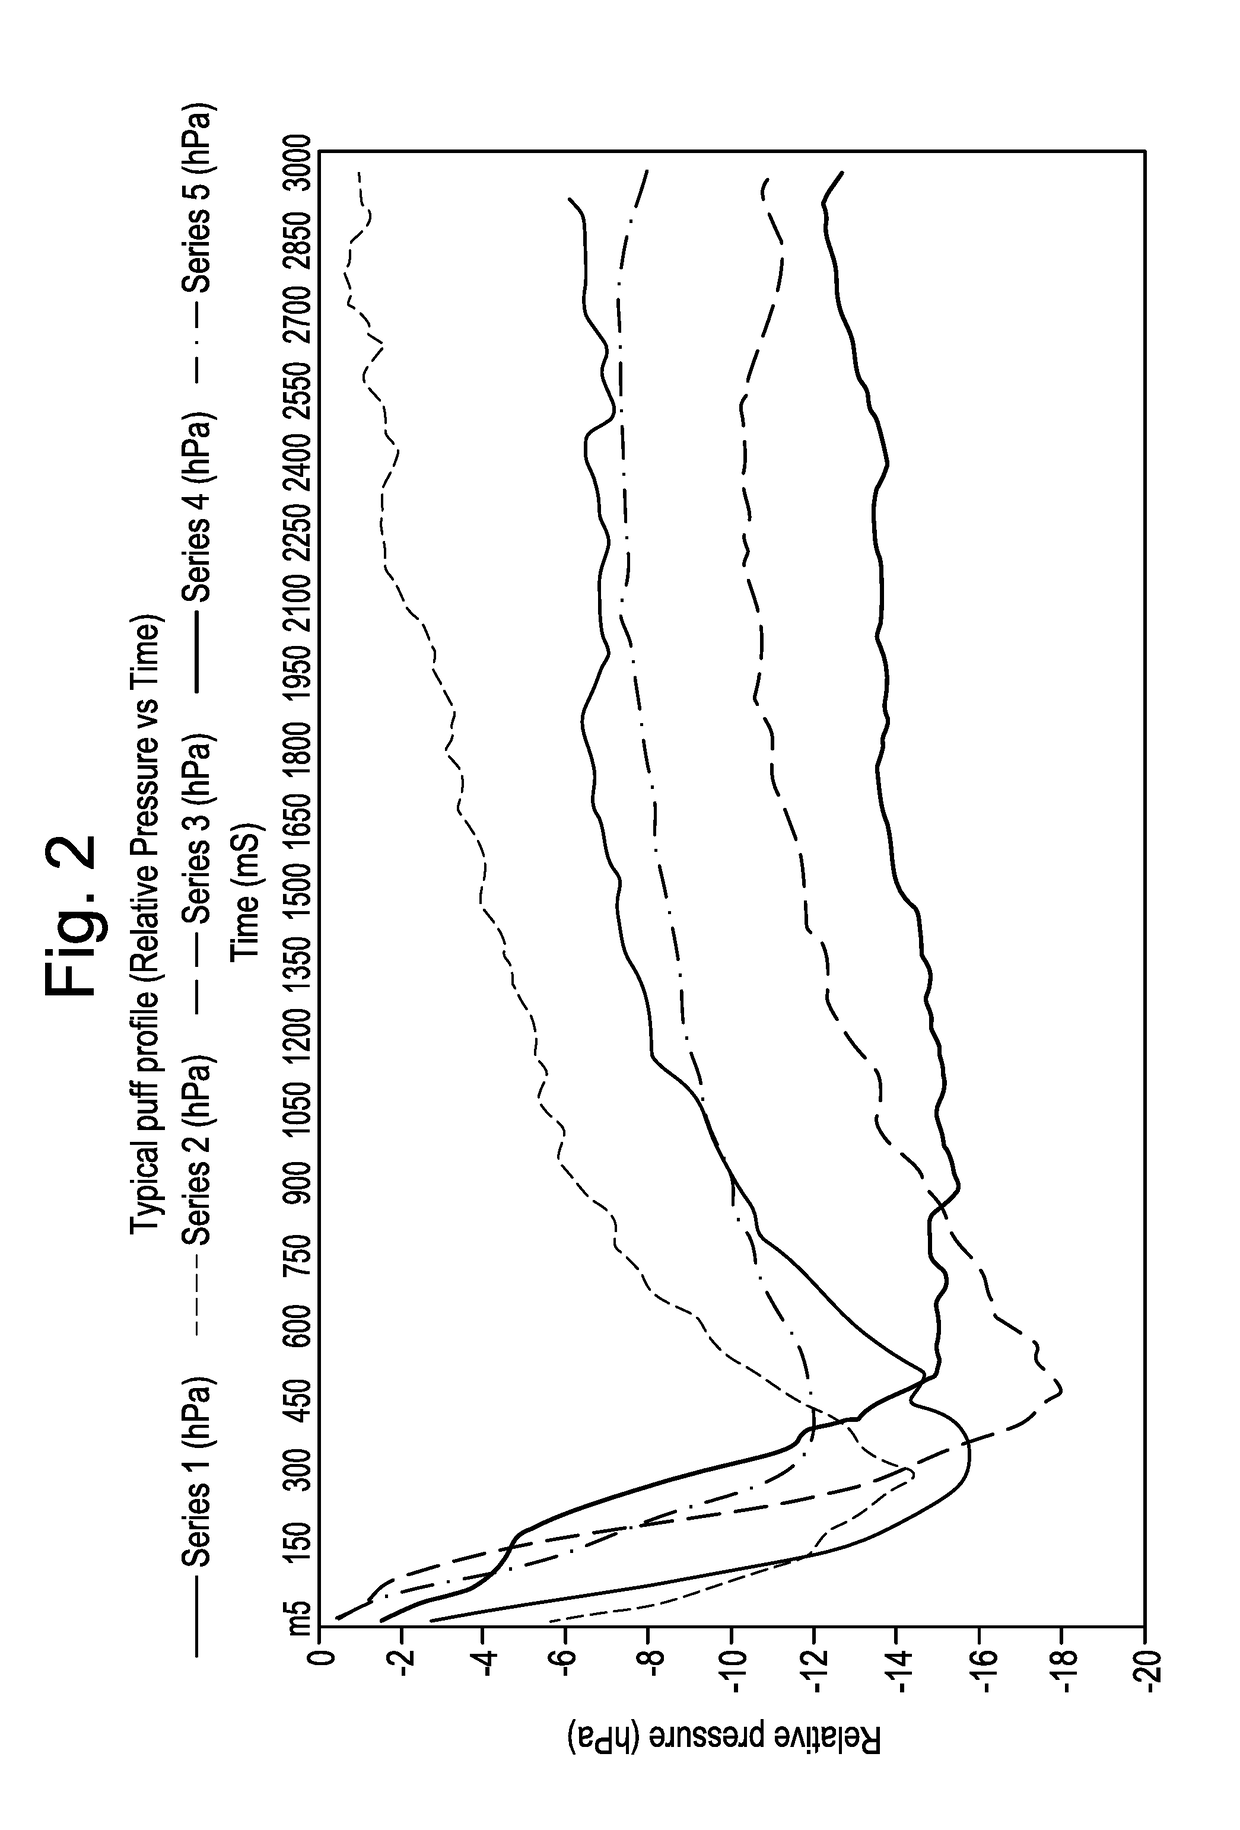 Aerosol-generating system with adjustable pump flow rate